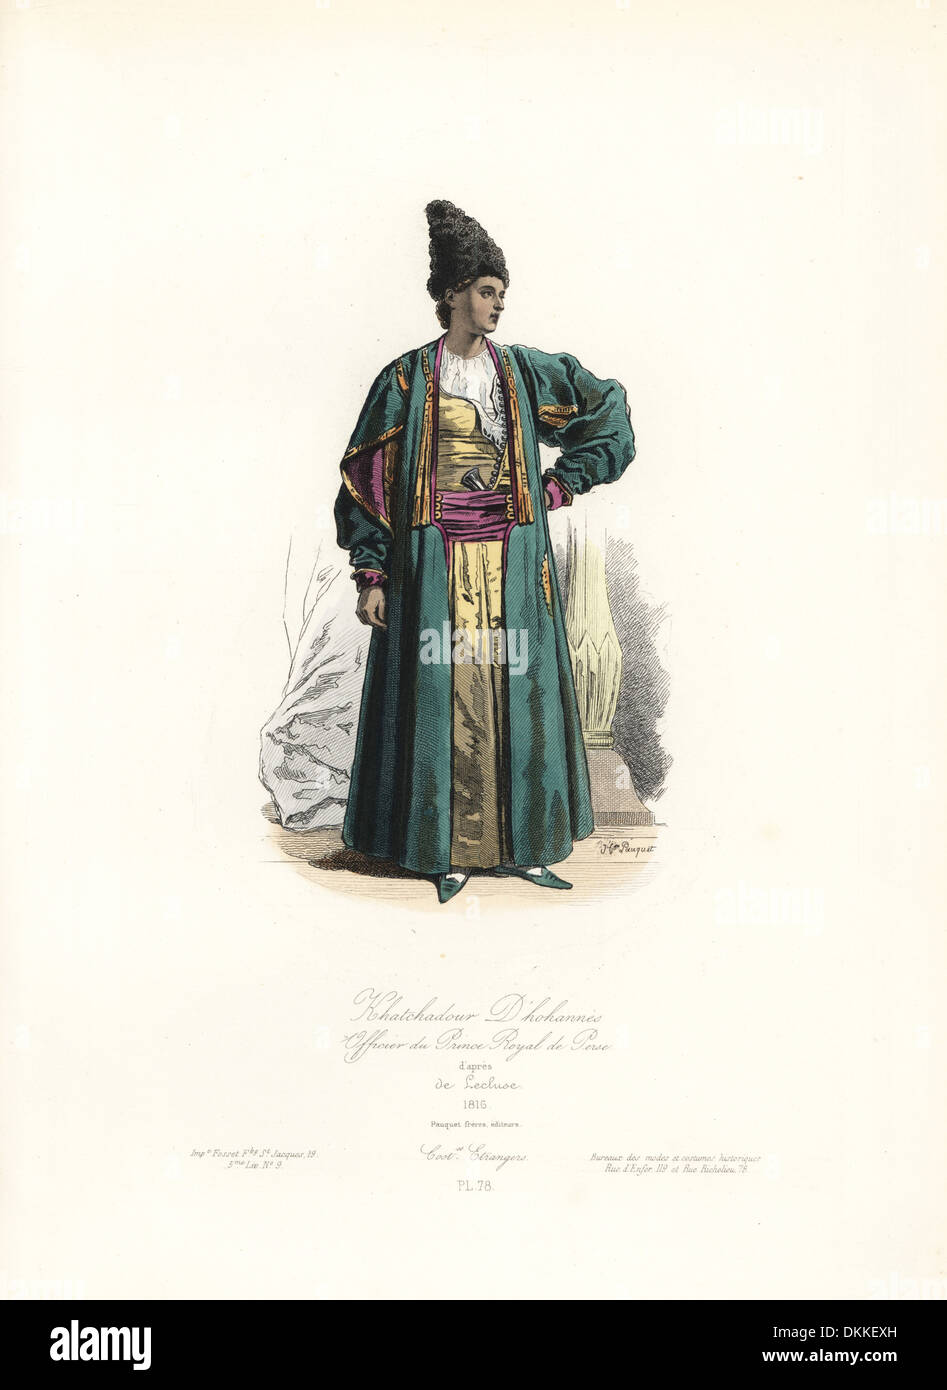 Khatchadour D'hohannes, officer of the Prince Royal of Persia, 1816. Stock Photo